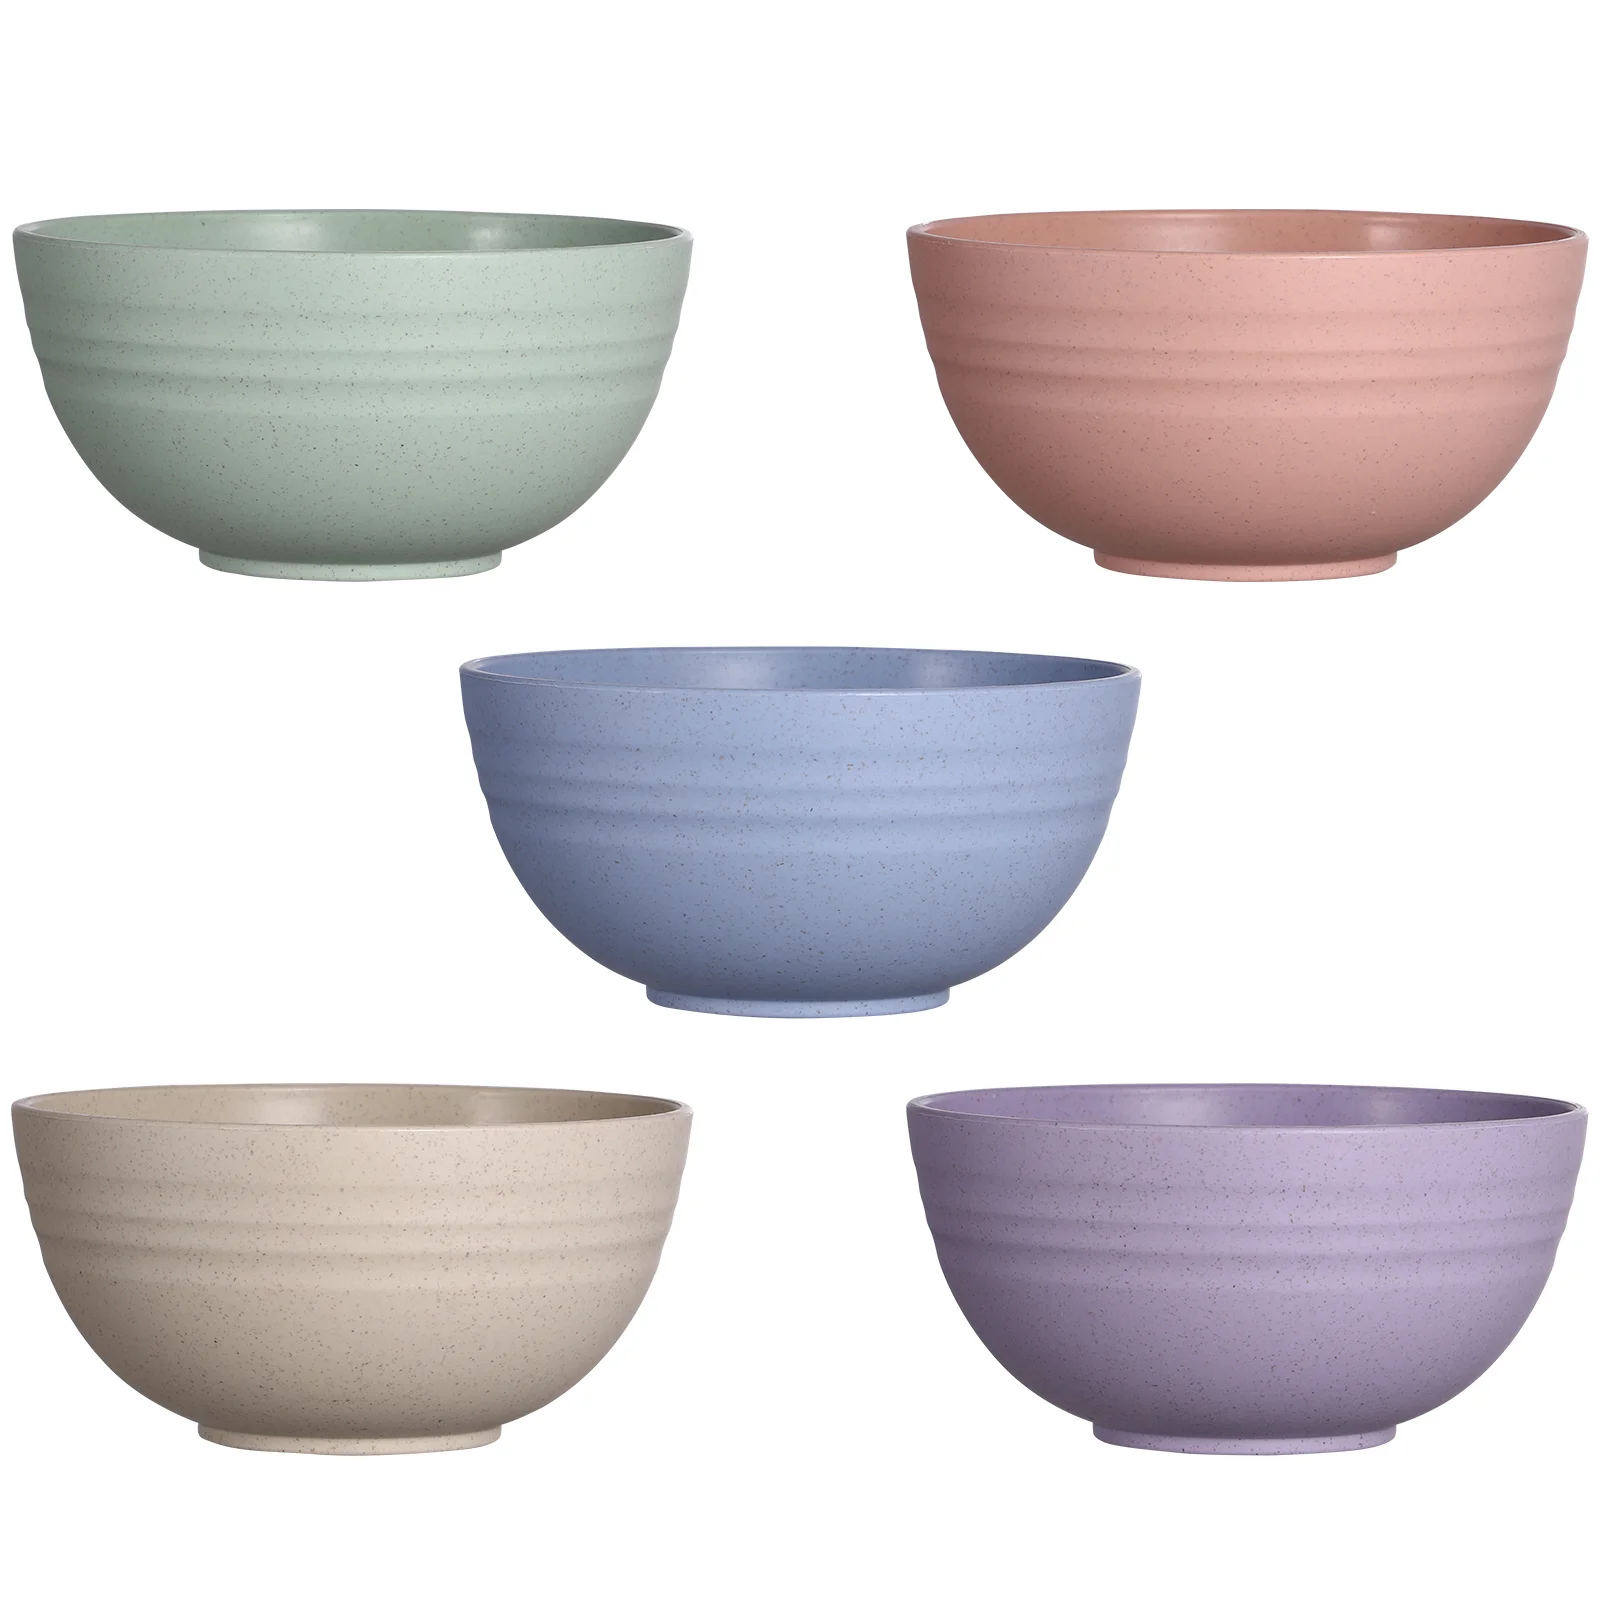 

Bowls Bowl Cereal Straw Wheat Set Saladunbreakable Mixing Soup Kitchen Snack Microwave Degradable Sets Safe Dinner Dishplates